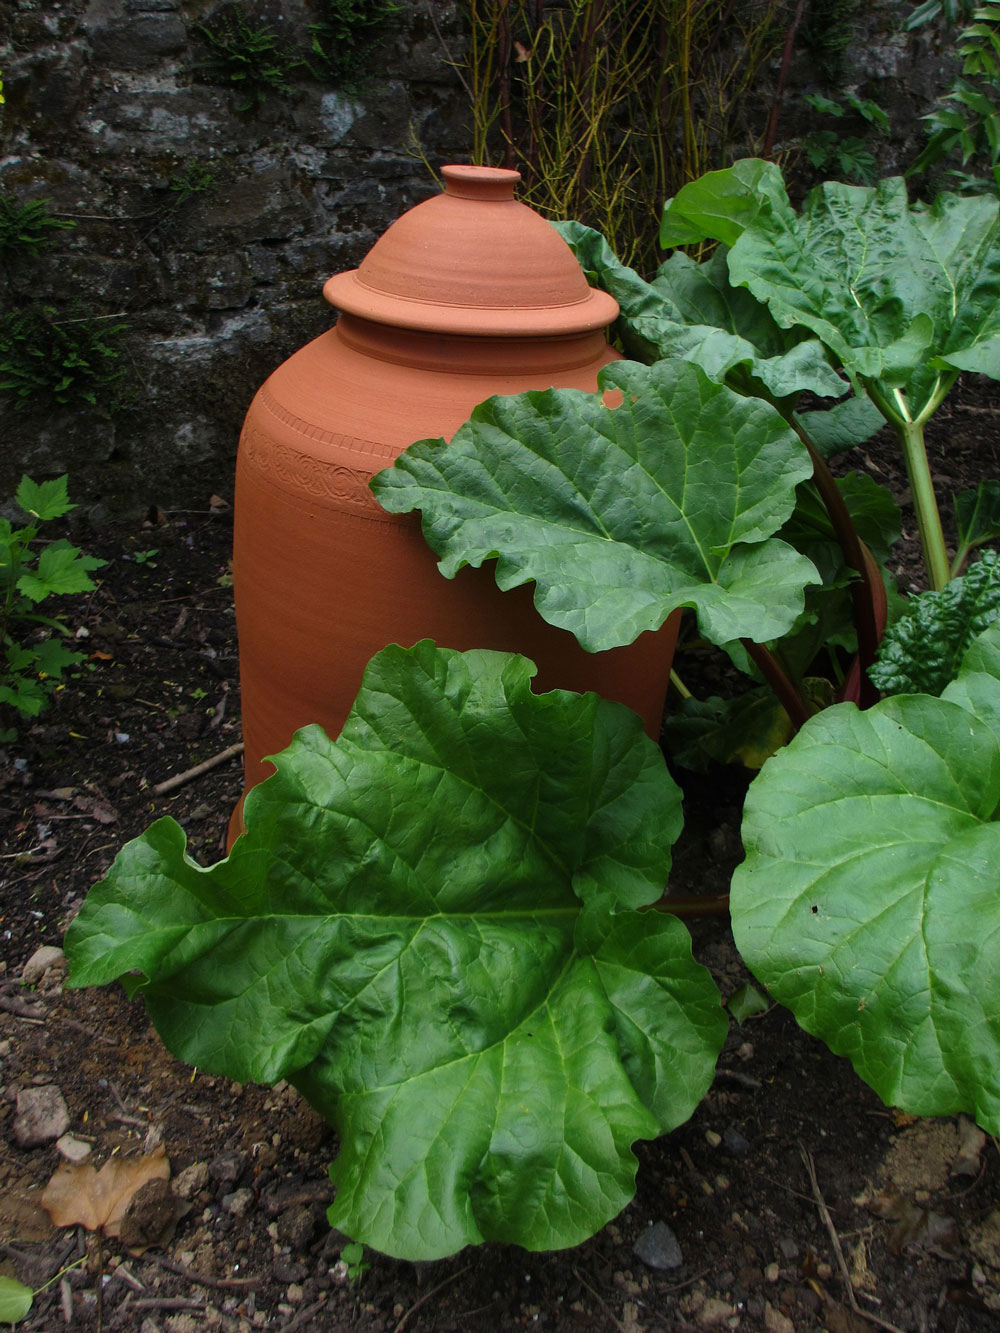 Use a forcer to accelerate rhubarb growth